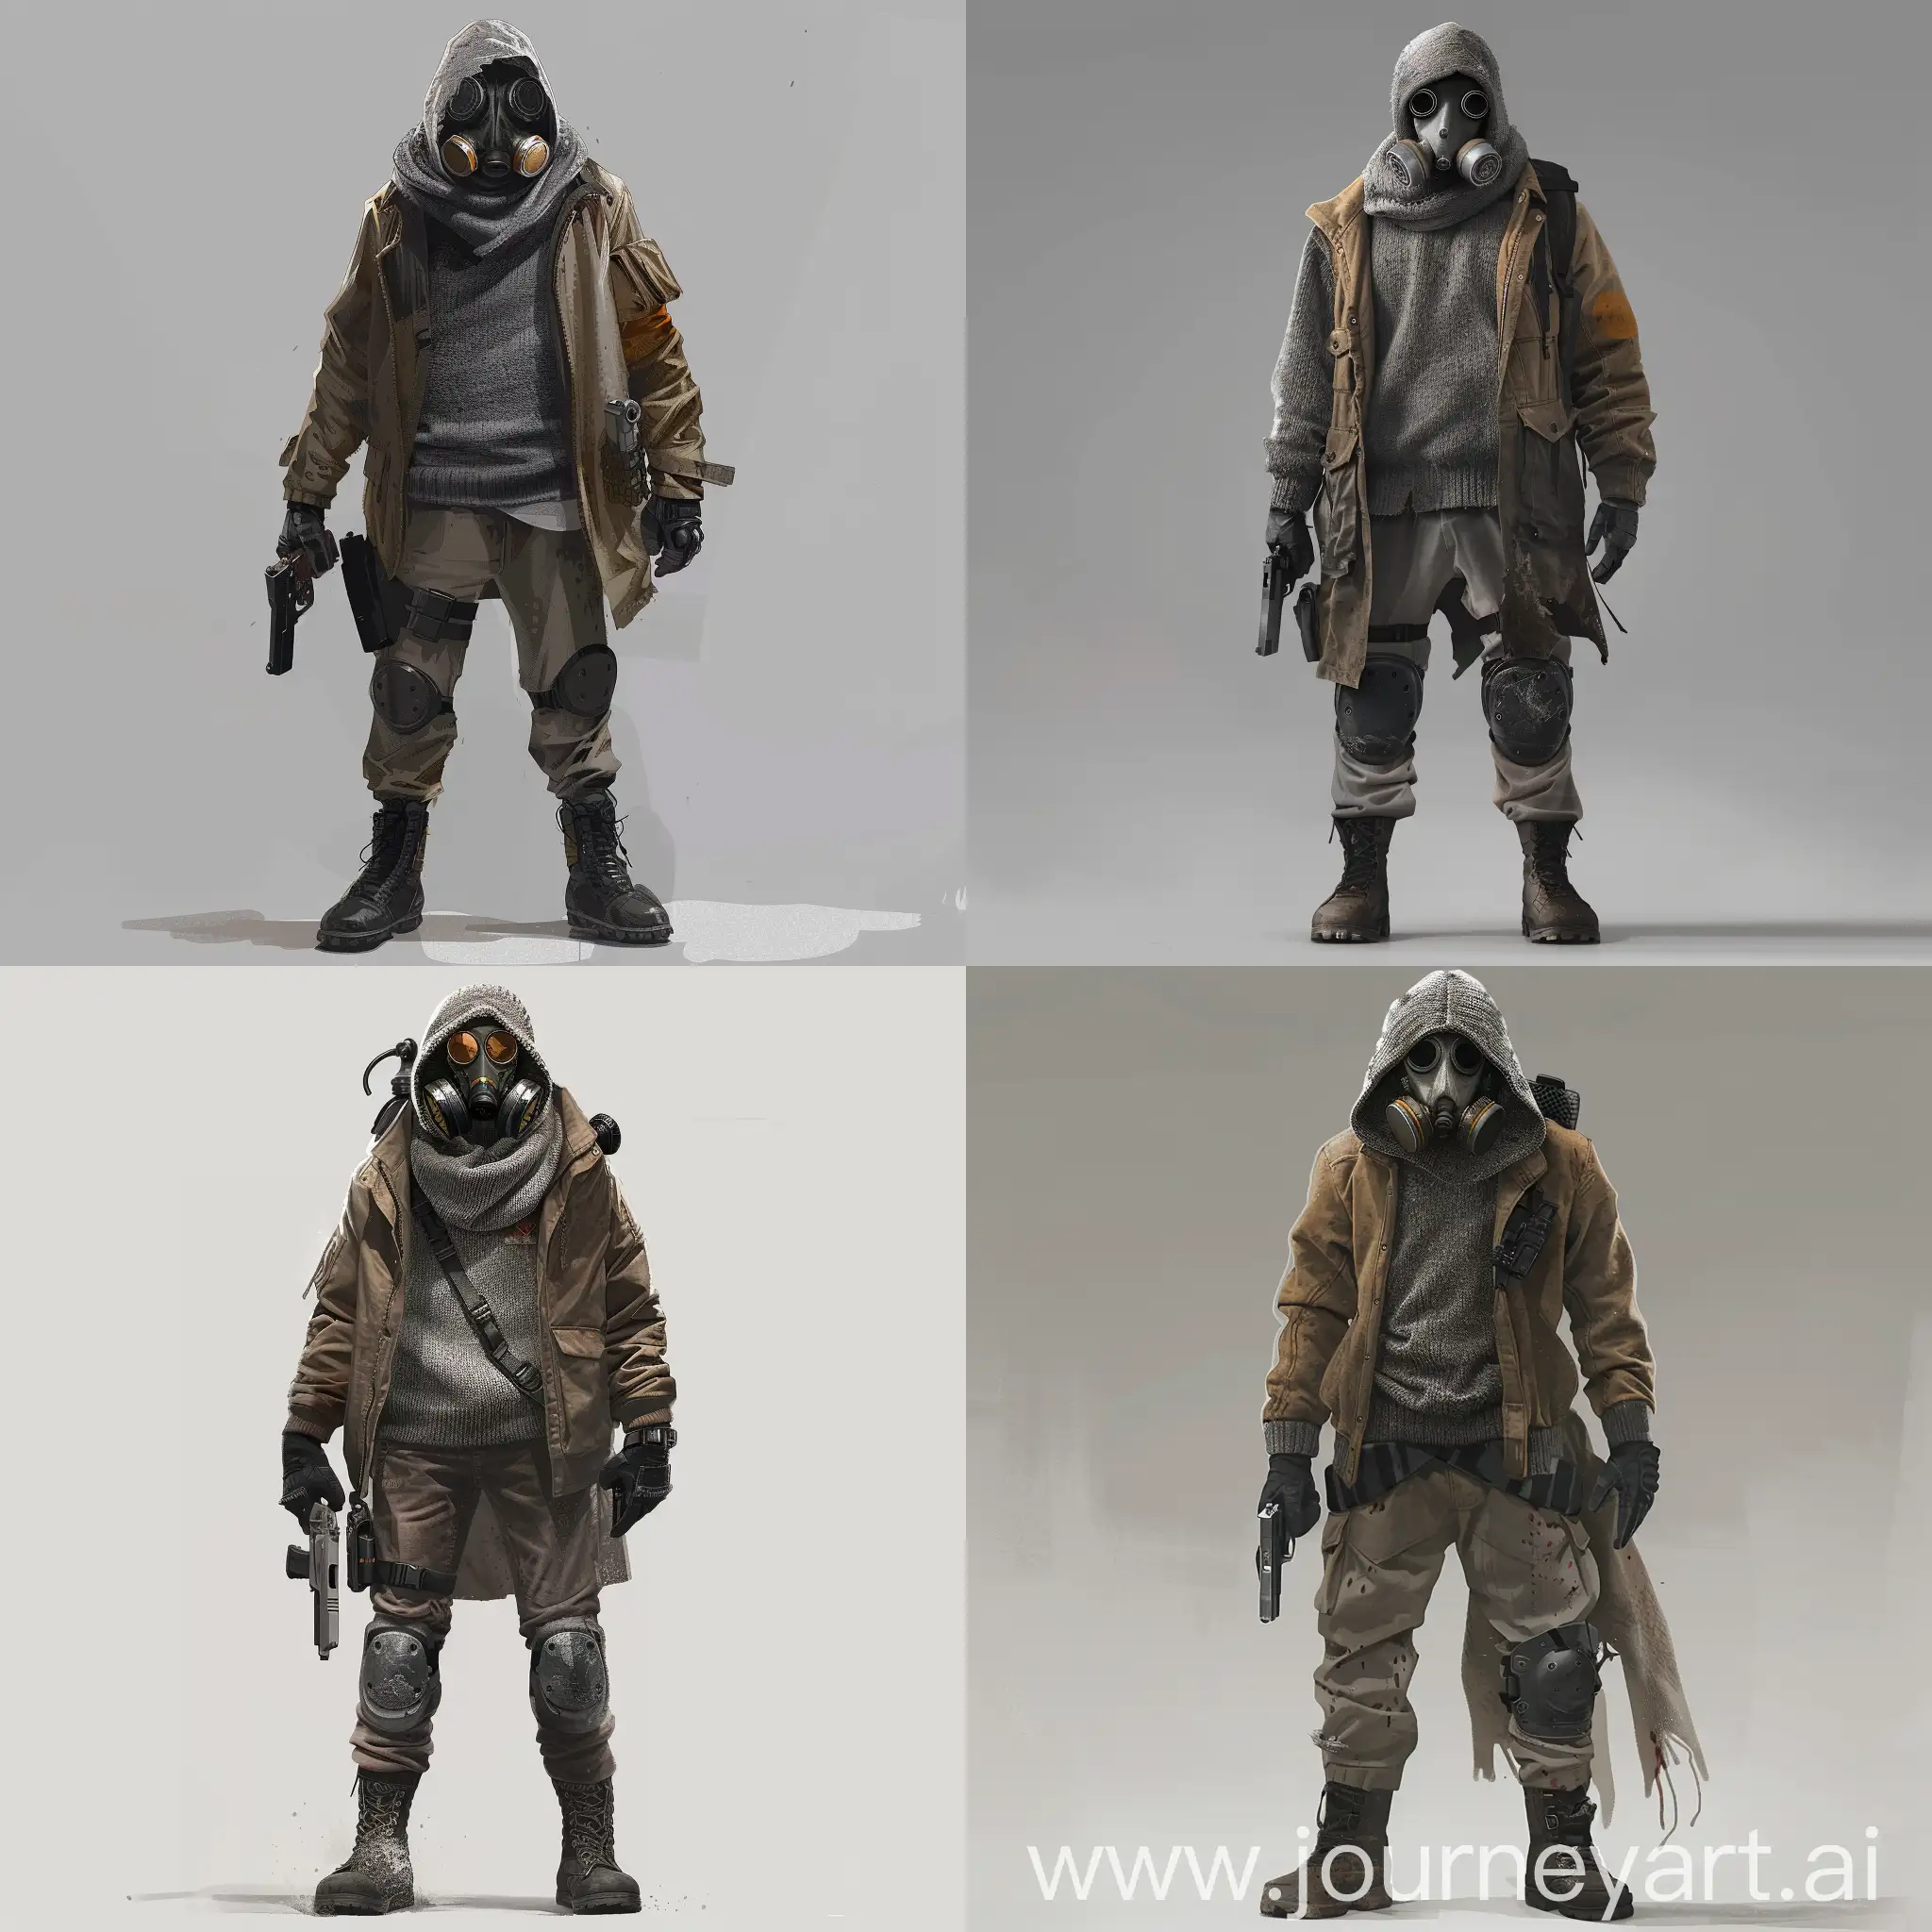 Concept art, a new stalker, a gray sweater over which he wears a dirty brown jacket, a gas mask on his face, a pistol in his hand, black gloves and army boots.